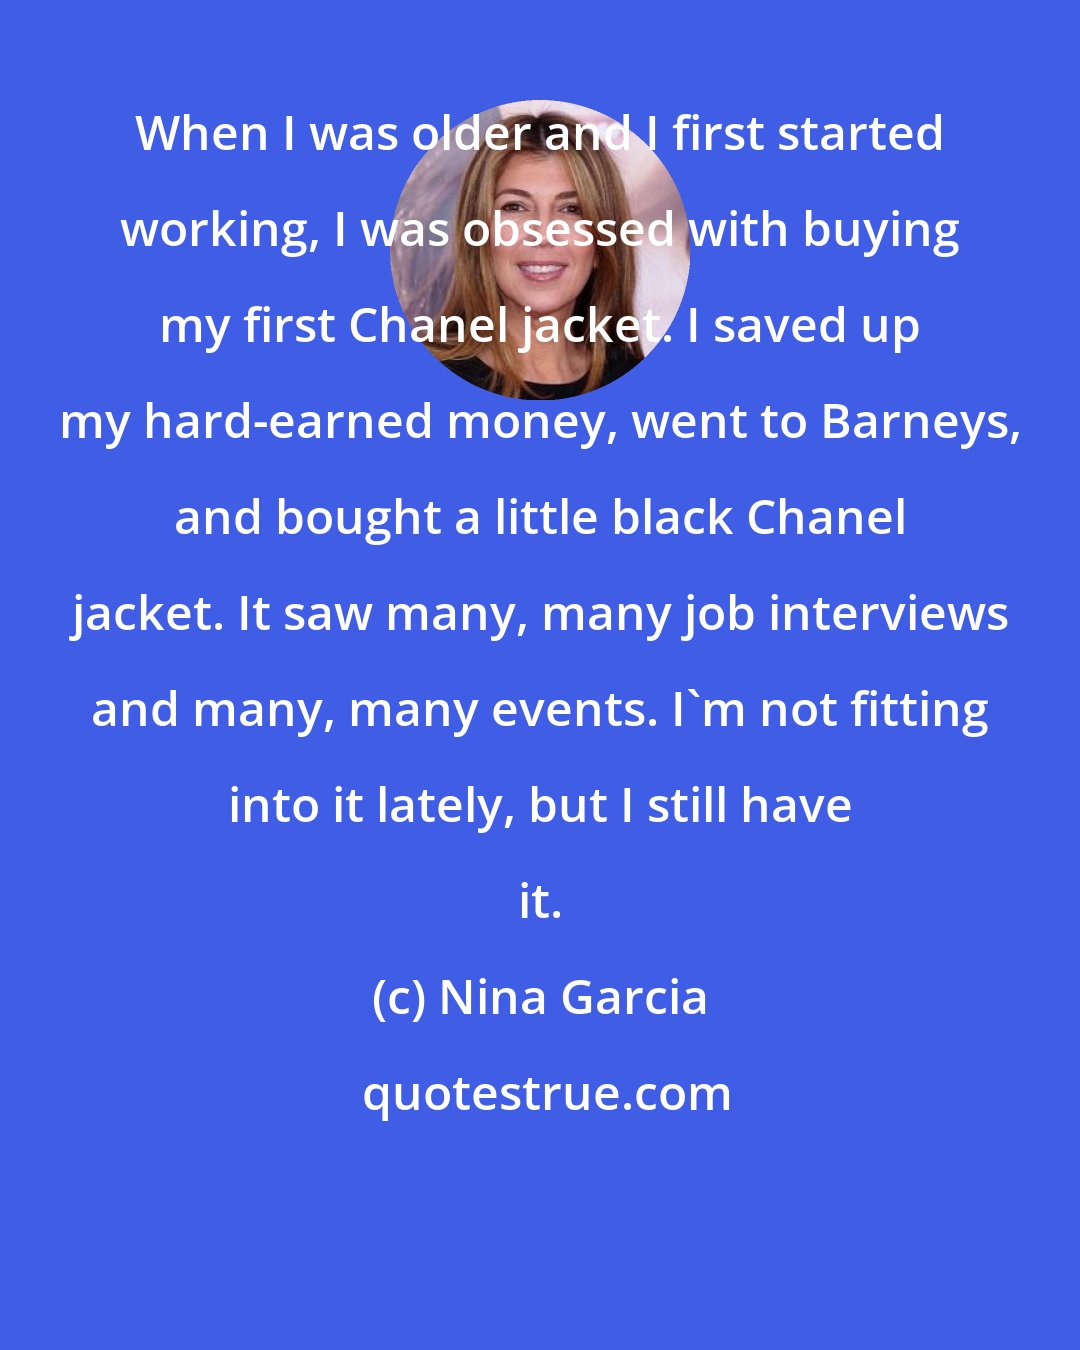 Nina Garcia: When I was older and I first started working, I was obsessed with buying my first Chanel jacket. I saved up my hard-earned money, went to Barneys, and bought a little black Chanel jacket. It saw many, many job interviews and many, many events. I'm not fitting into it lately, but I still have it.